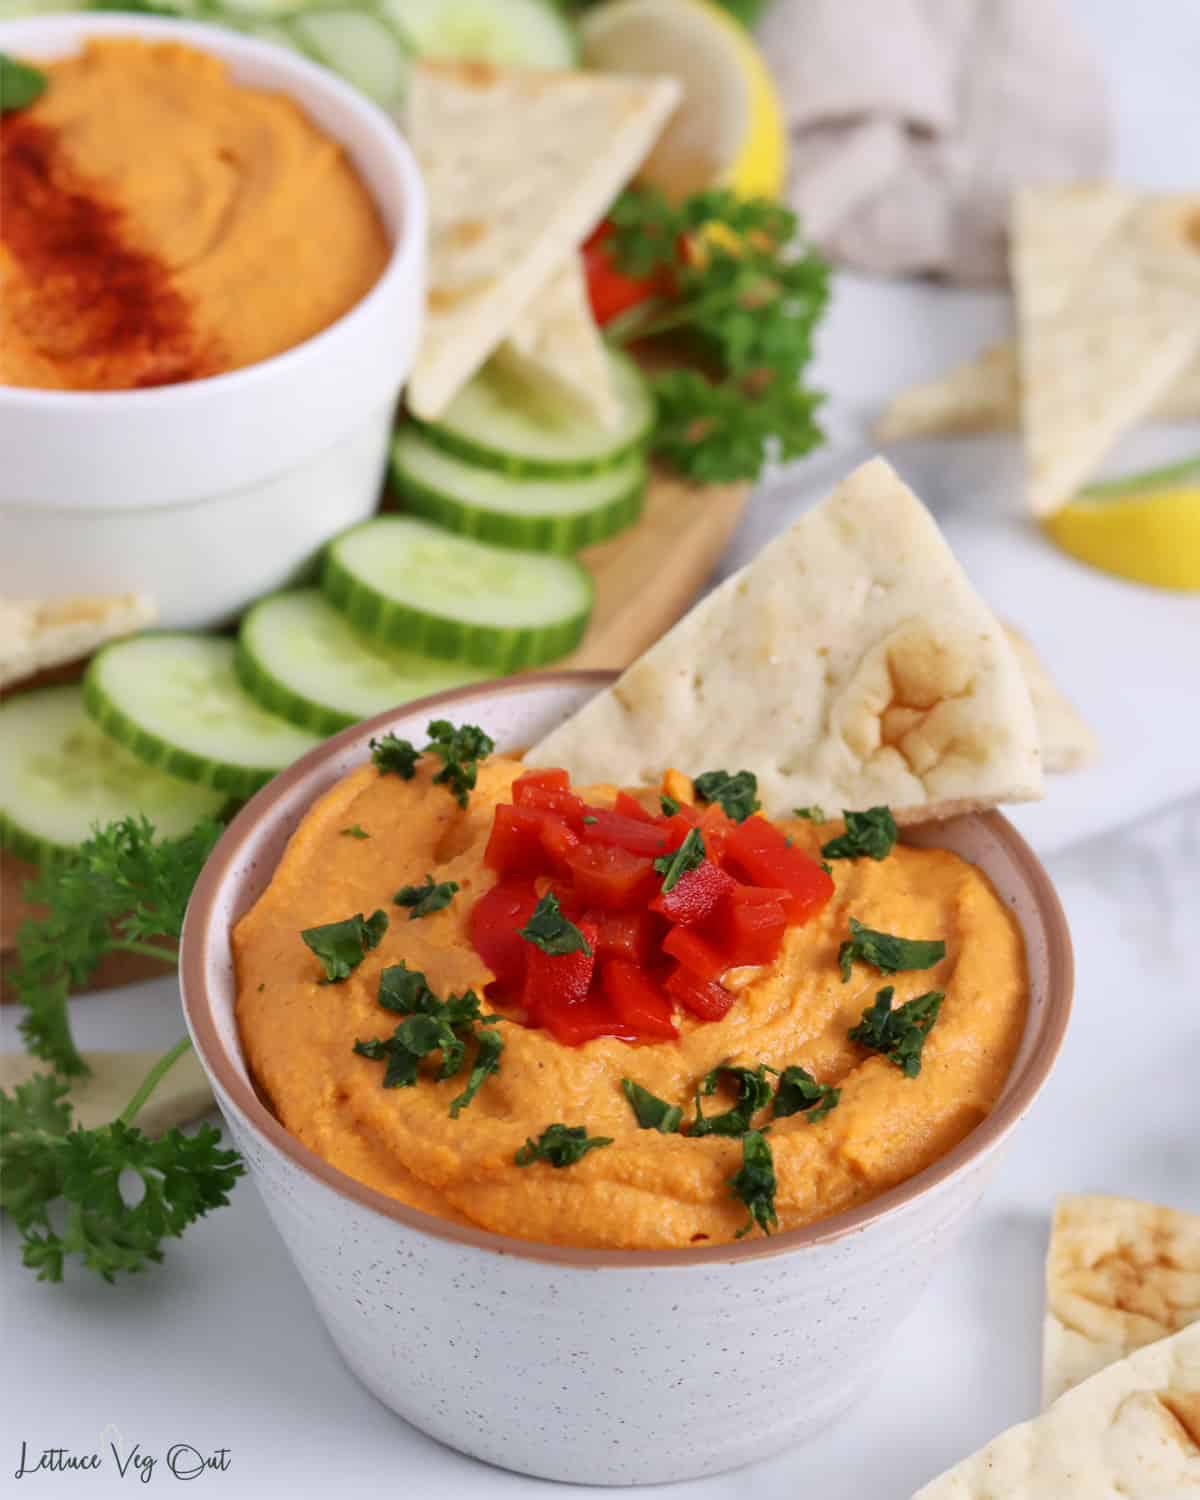 Bowl of roasted red pepper hummus with pita bread dipped in it.